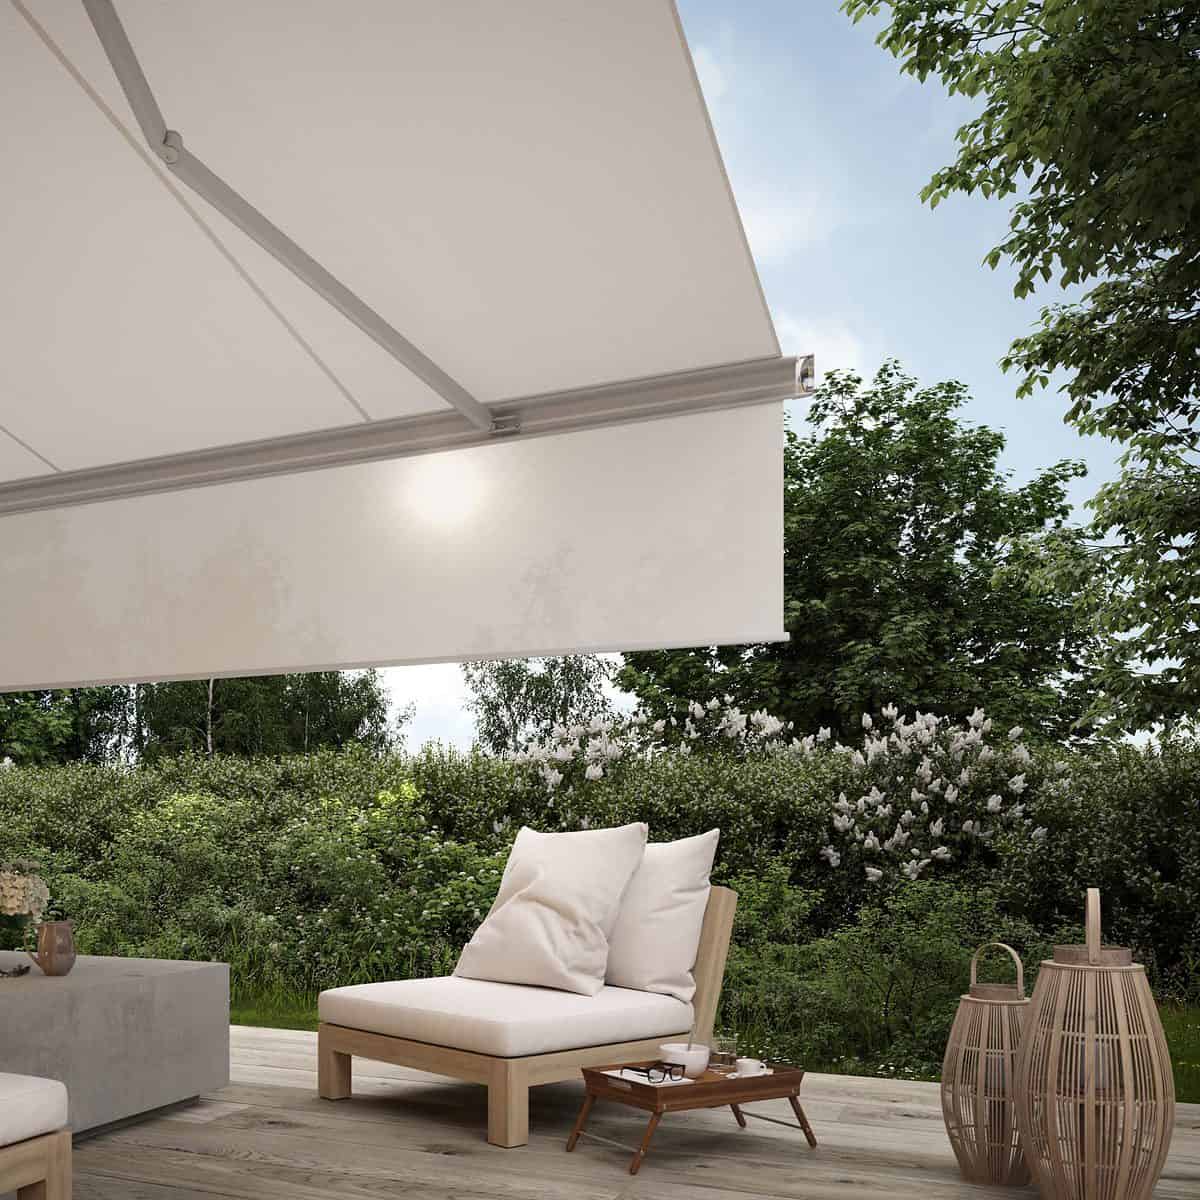 An example of the reddot design award awning markilux 6000